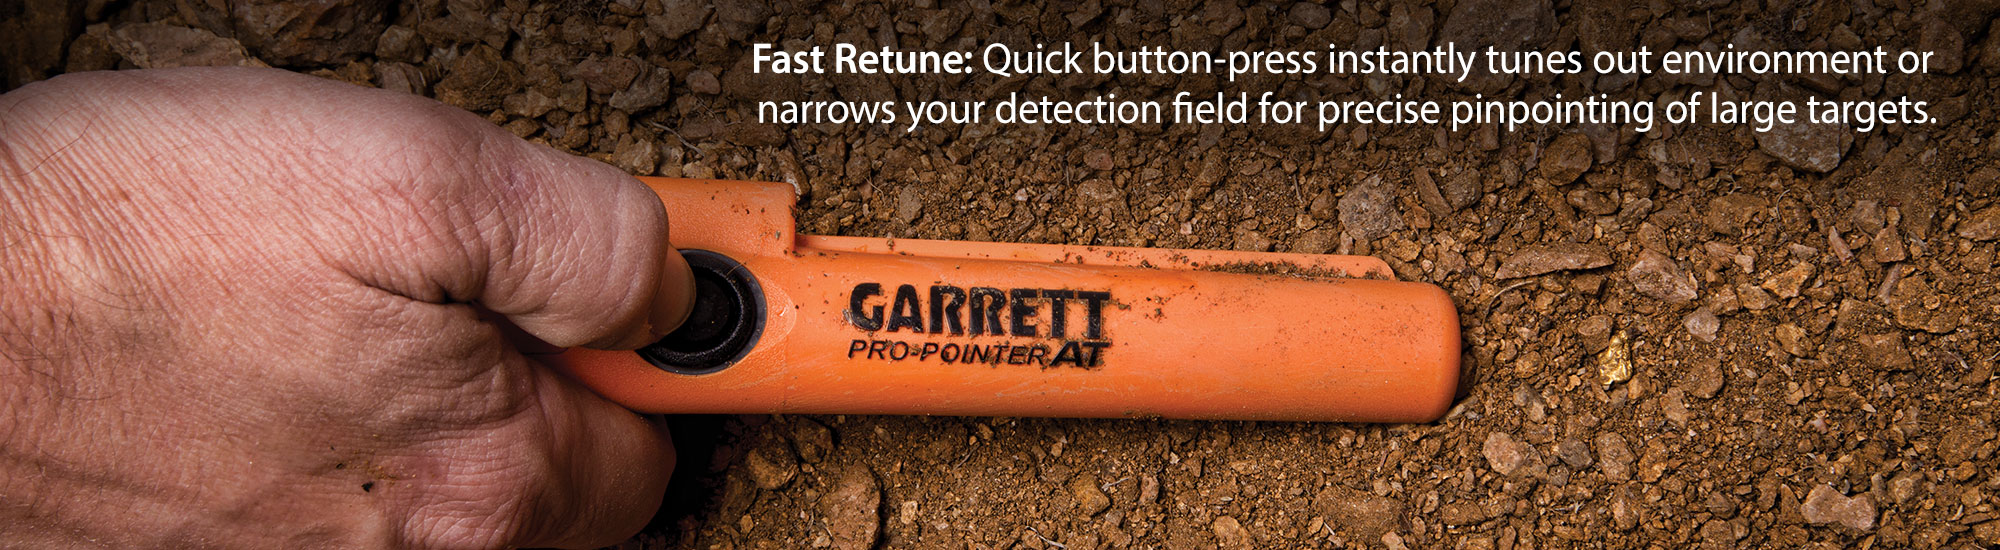 Fast Retune: Quick button-press instantly tunes out environment or narrows your detection field for precise pinpointing of large targets.